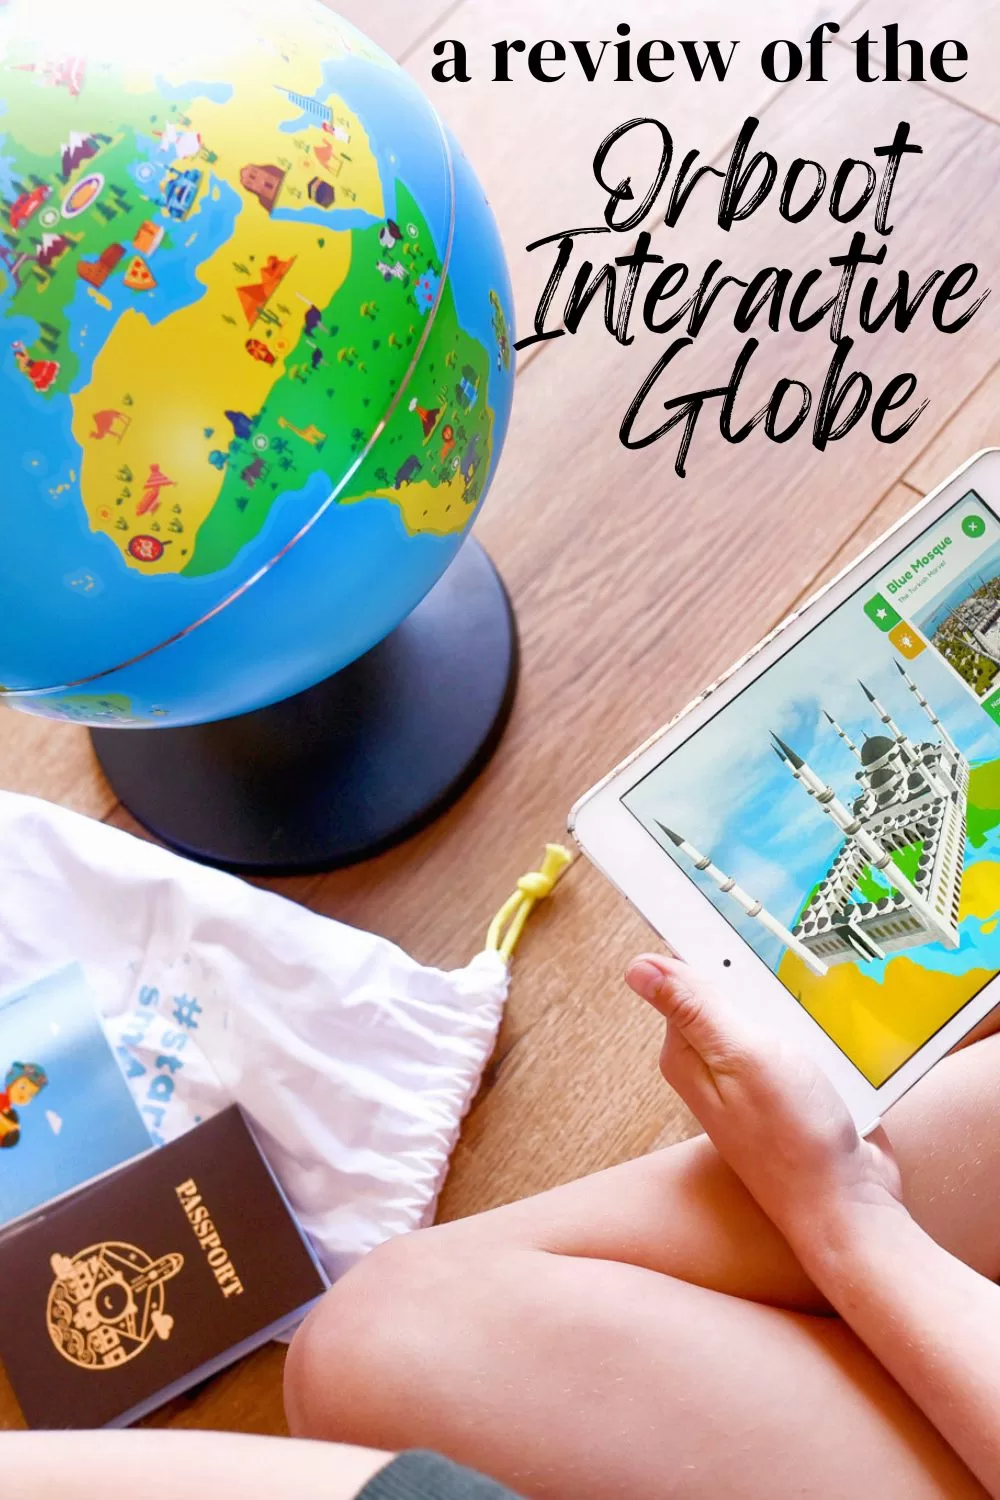 image shows a girl looking at the Orboot Educational Globe and the caption reads "a review of the Orboot Interactive Globe"